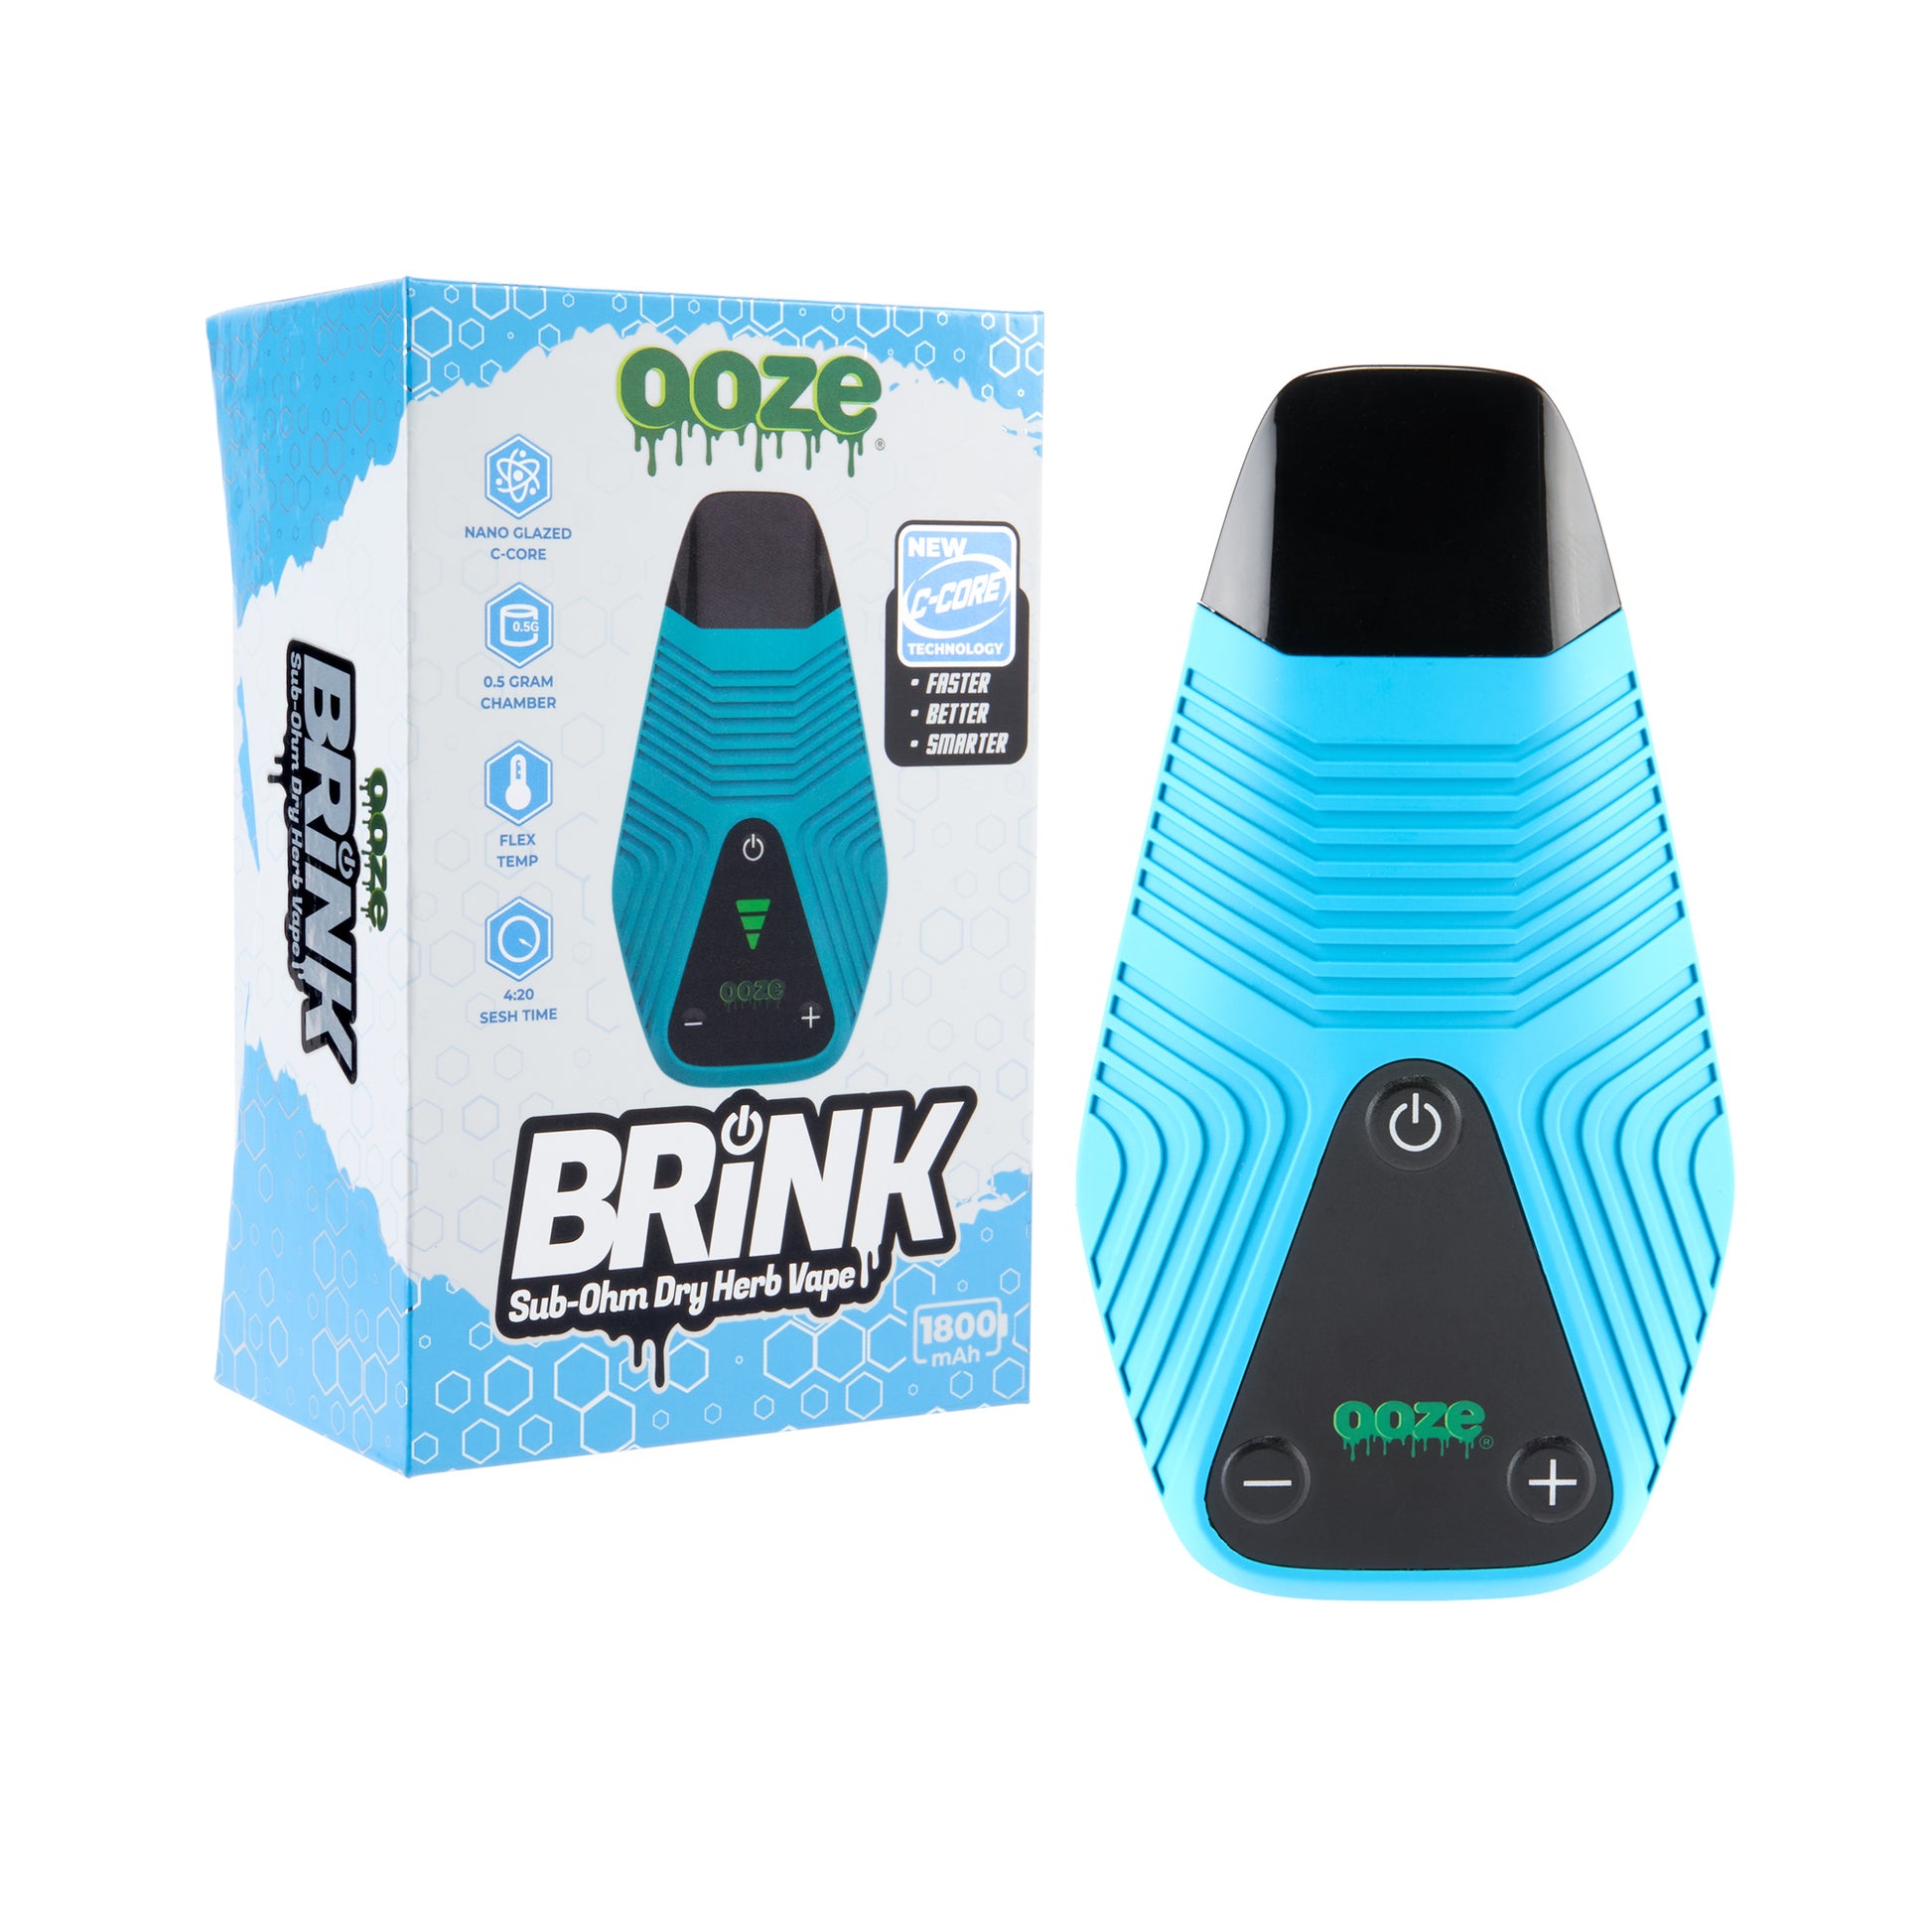 The sapphire blue Ooze Brink dry herb vape is shown next to the box